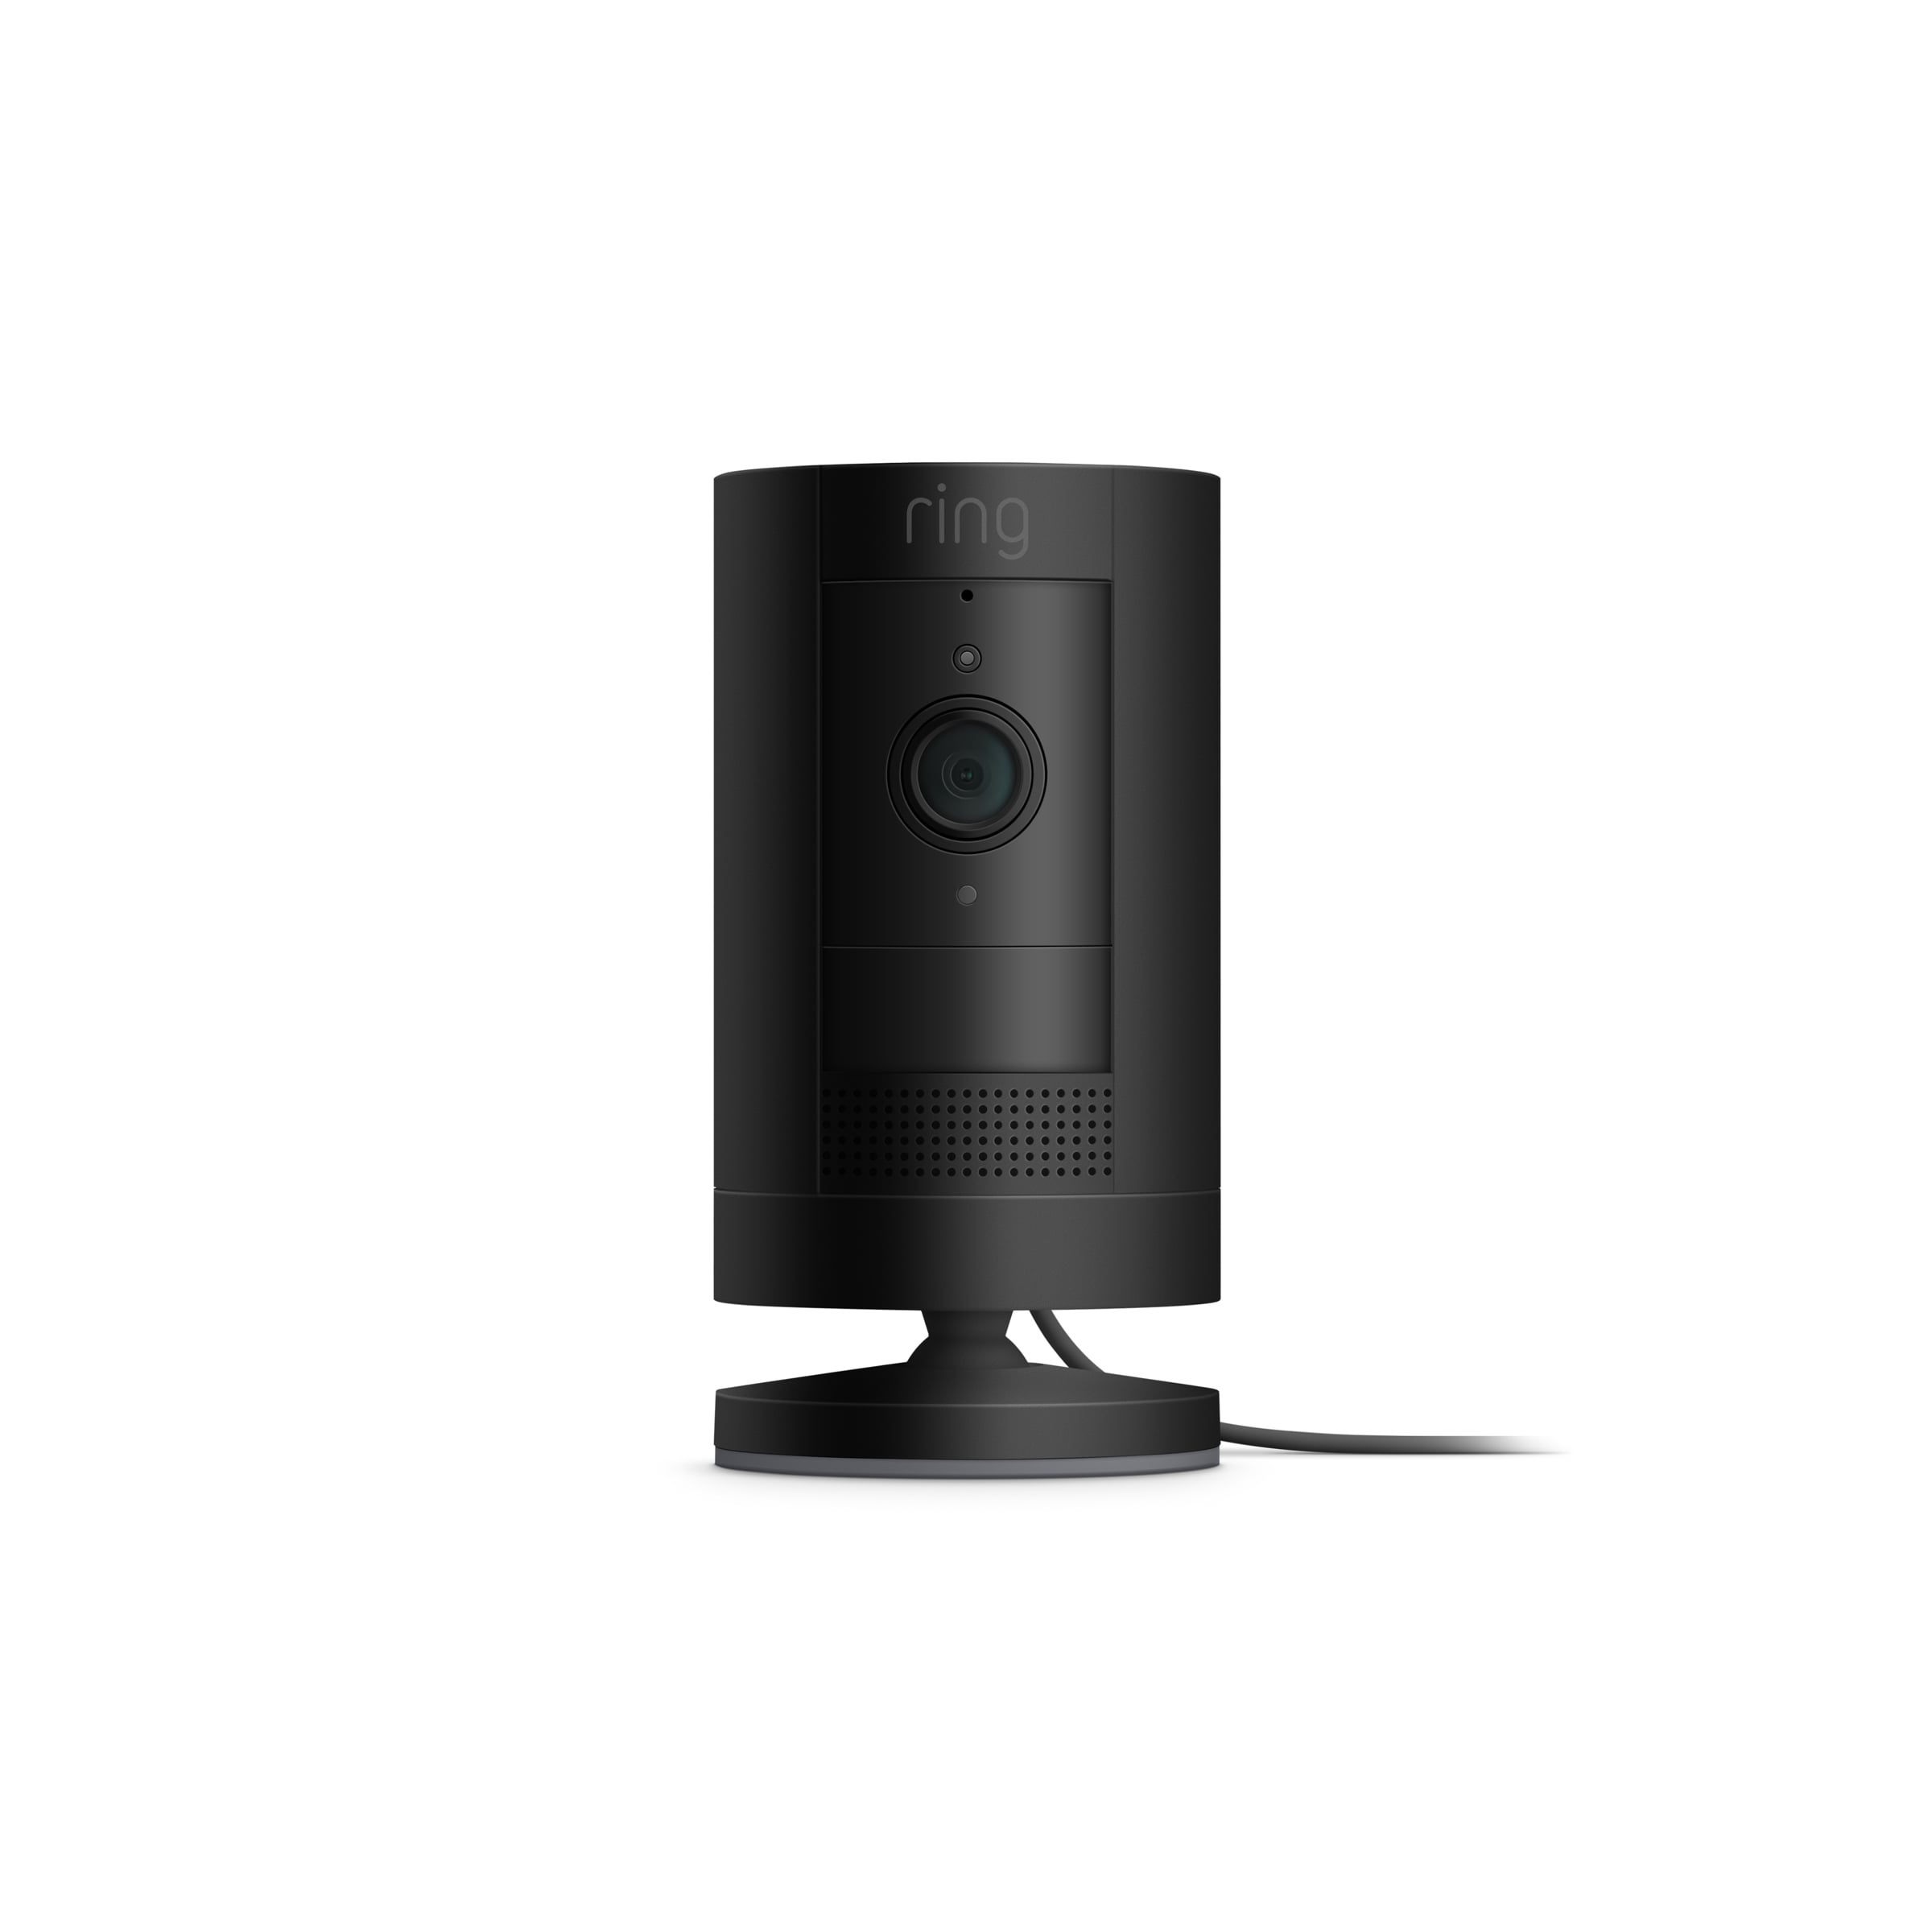 Ring Certified Refurbished Floodlight Cam - Hardwired Outdoor Smart  Security Camera with Two LED Floodlights - Black at Lowes.com